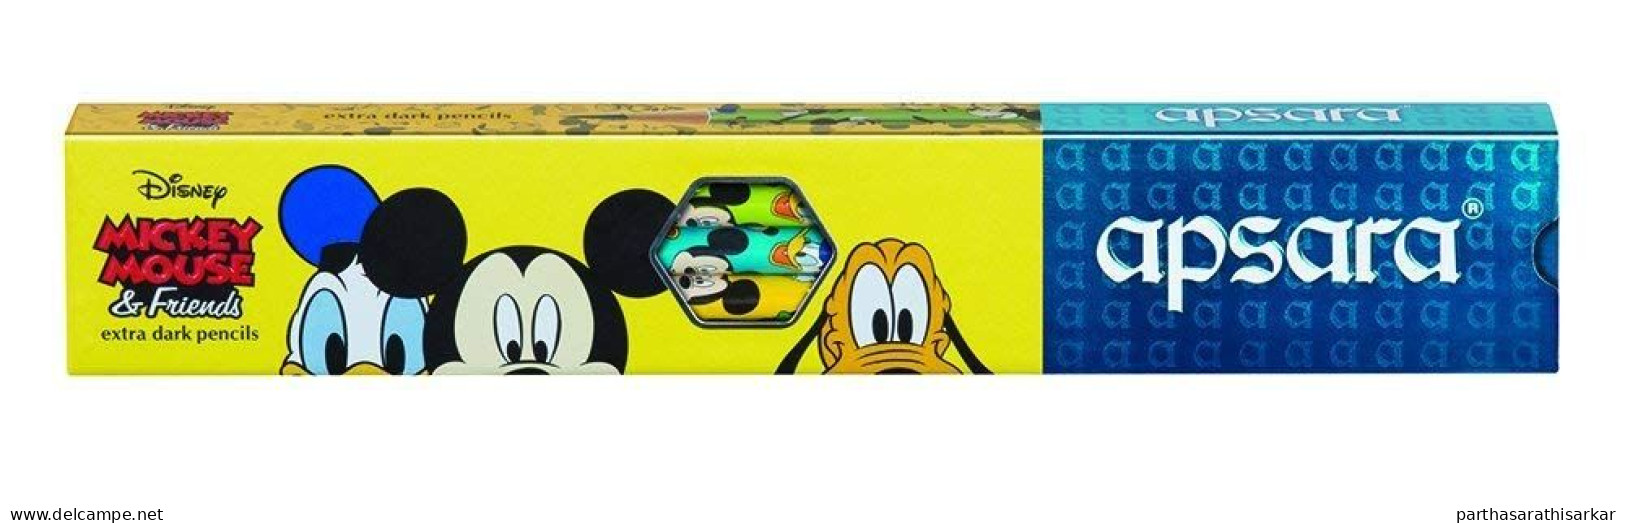 MICKY MOUSE DISNEY PENCILS FROM INDIAN BRAND APSARA SET OF 5 PENCILS (2 SETS IN A PACK) - Stempel & Siegel